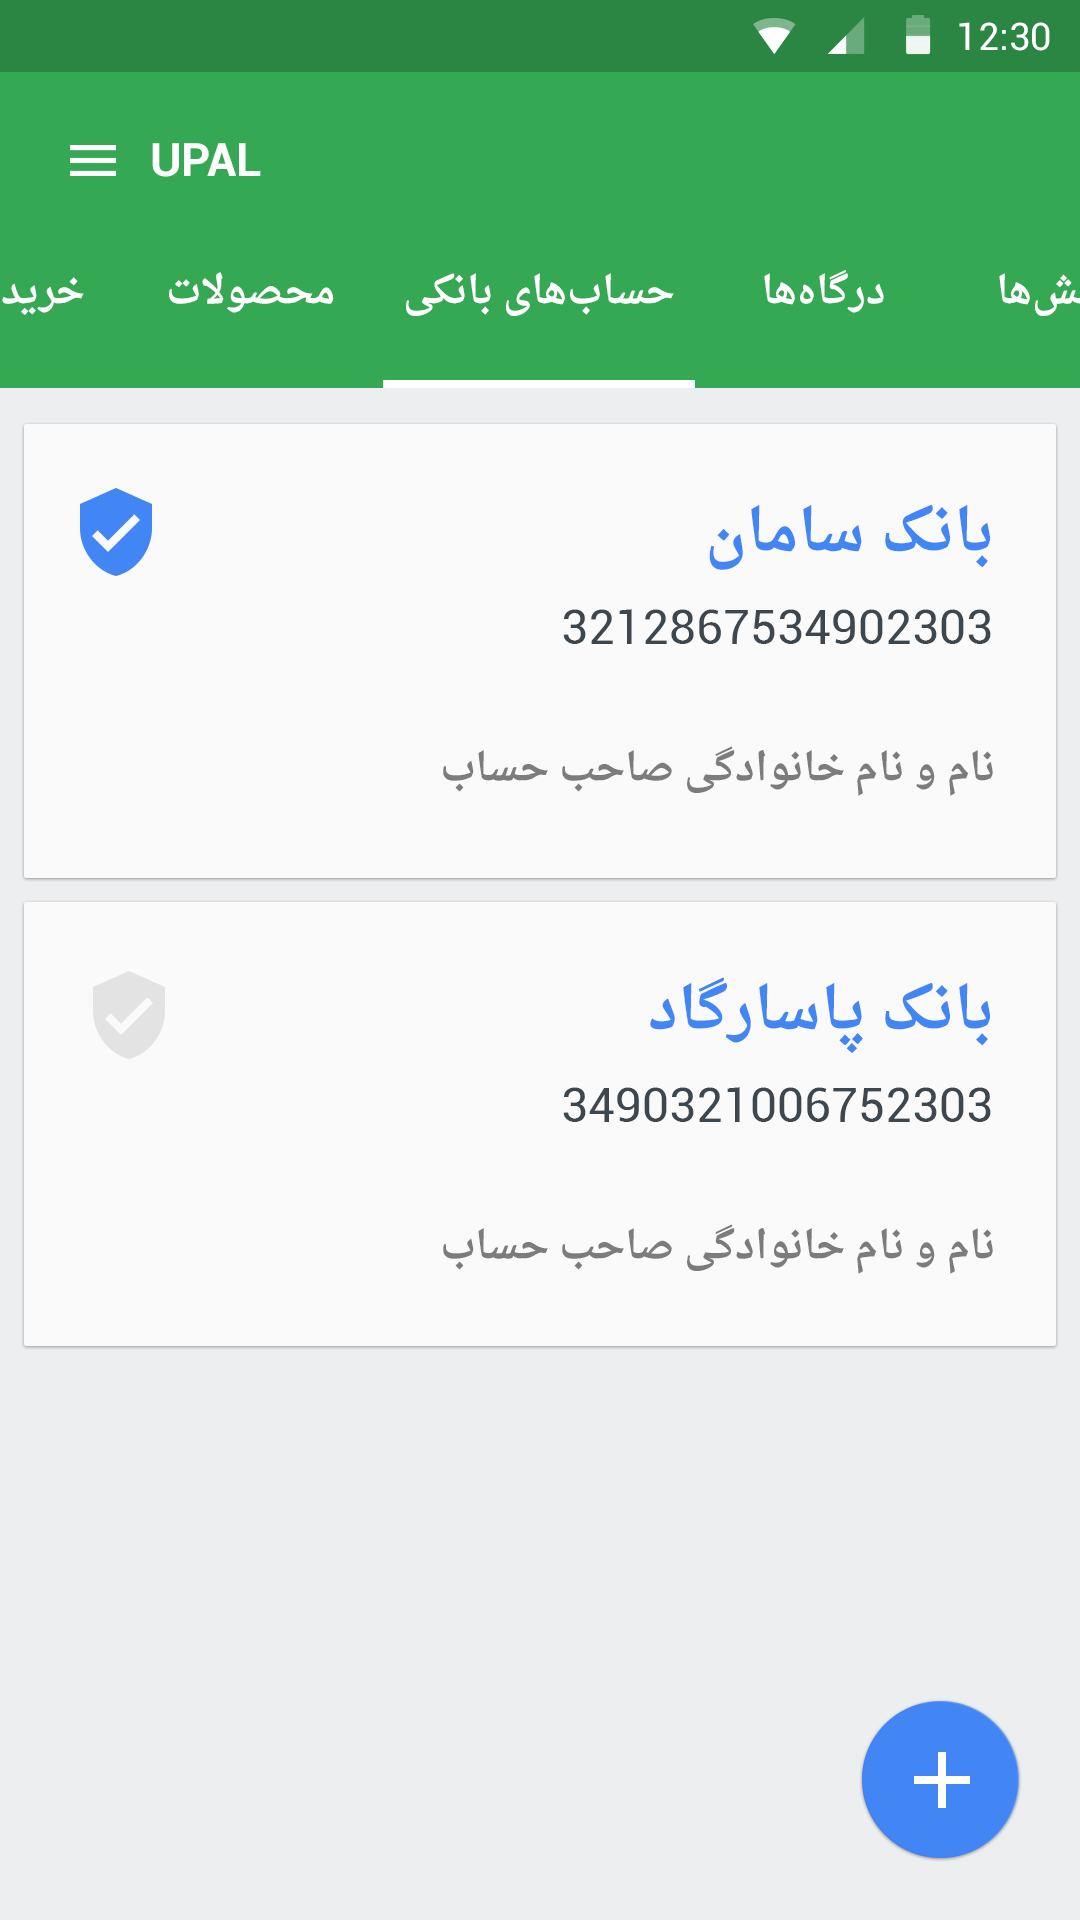 Upal for Android by Pouya Saadeghi - /projects/5daJWLQ0lq1F25r7a17etuARHEwiPpQc.png